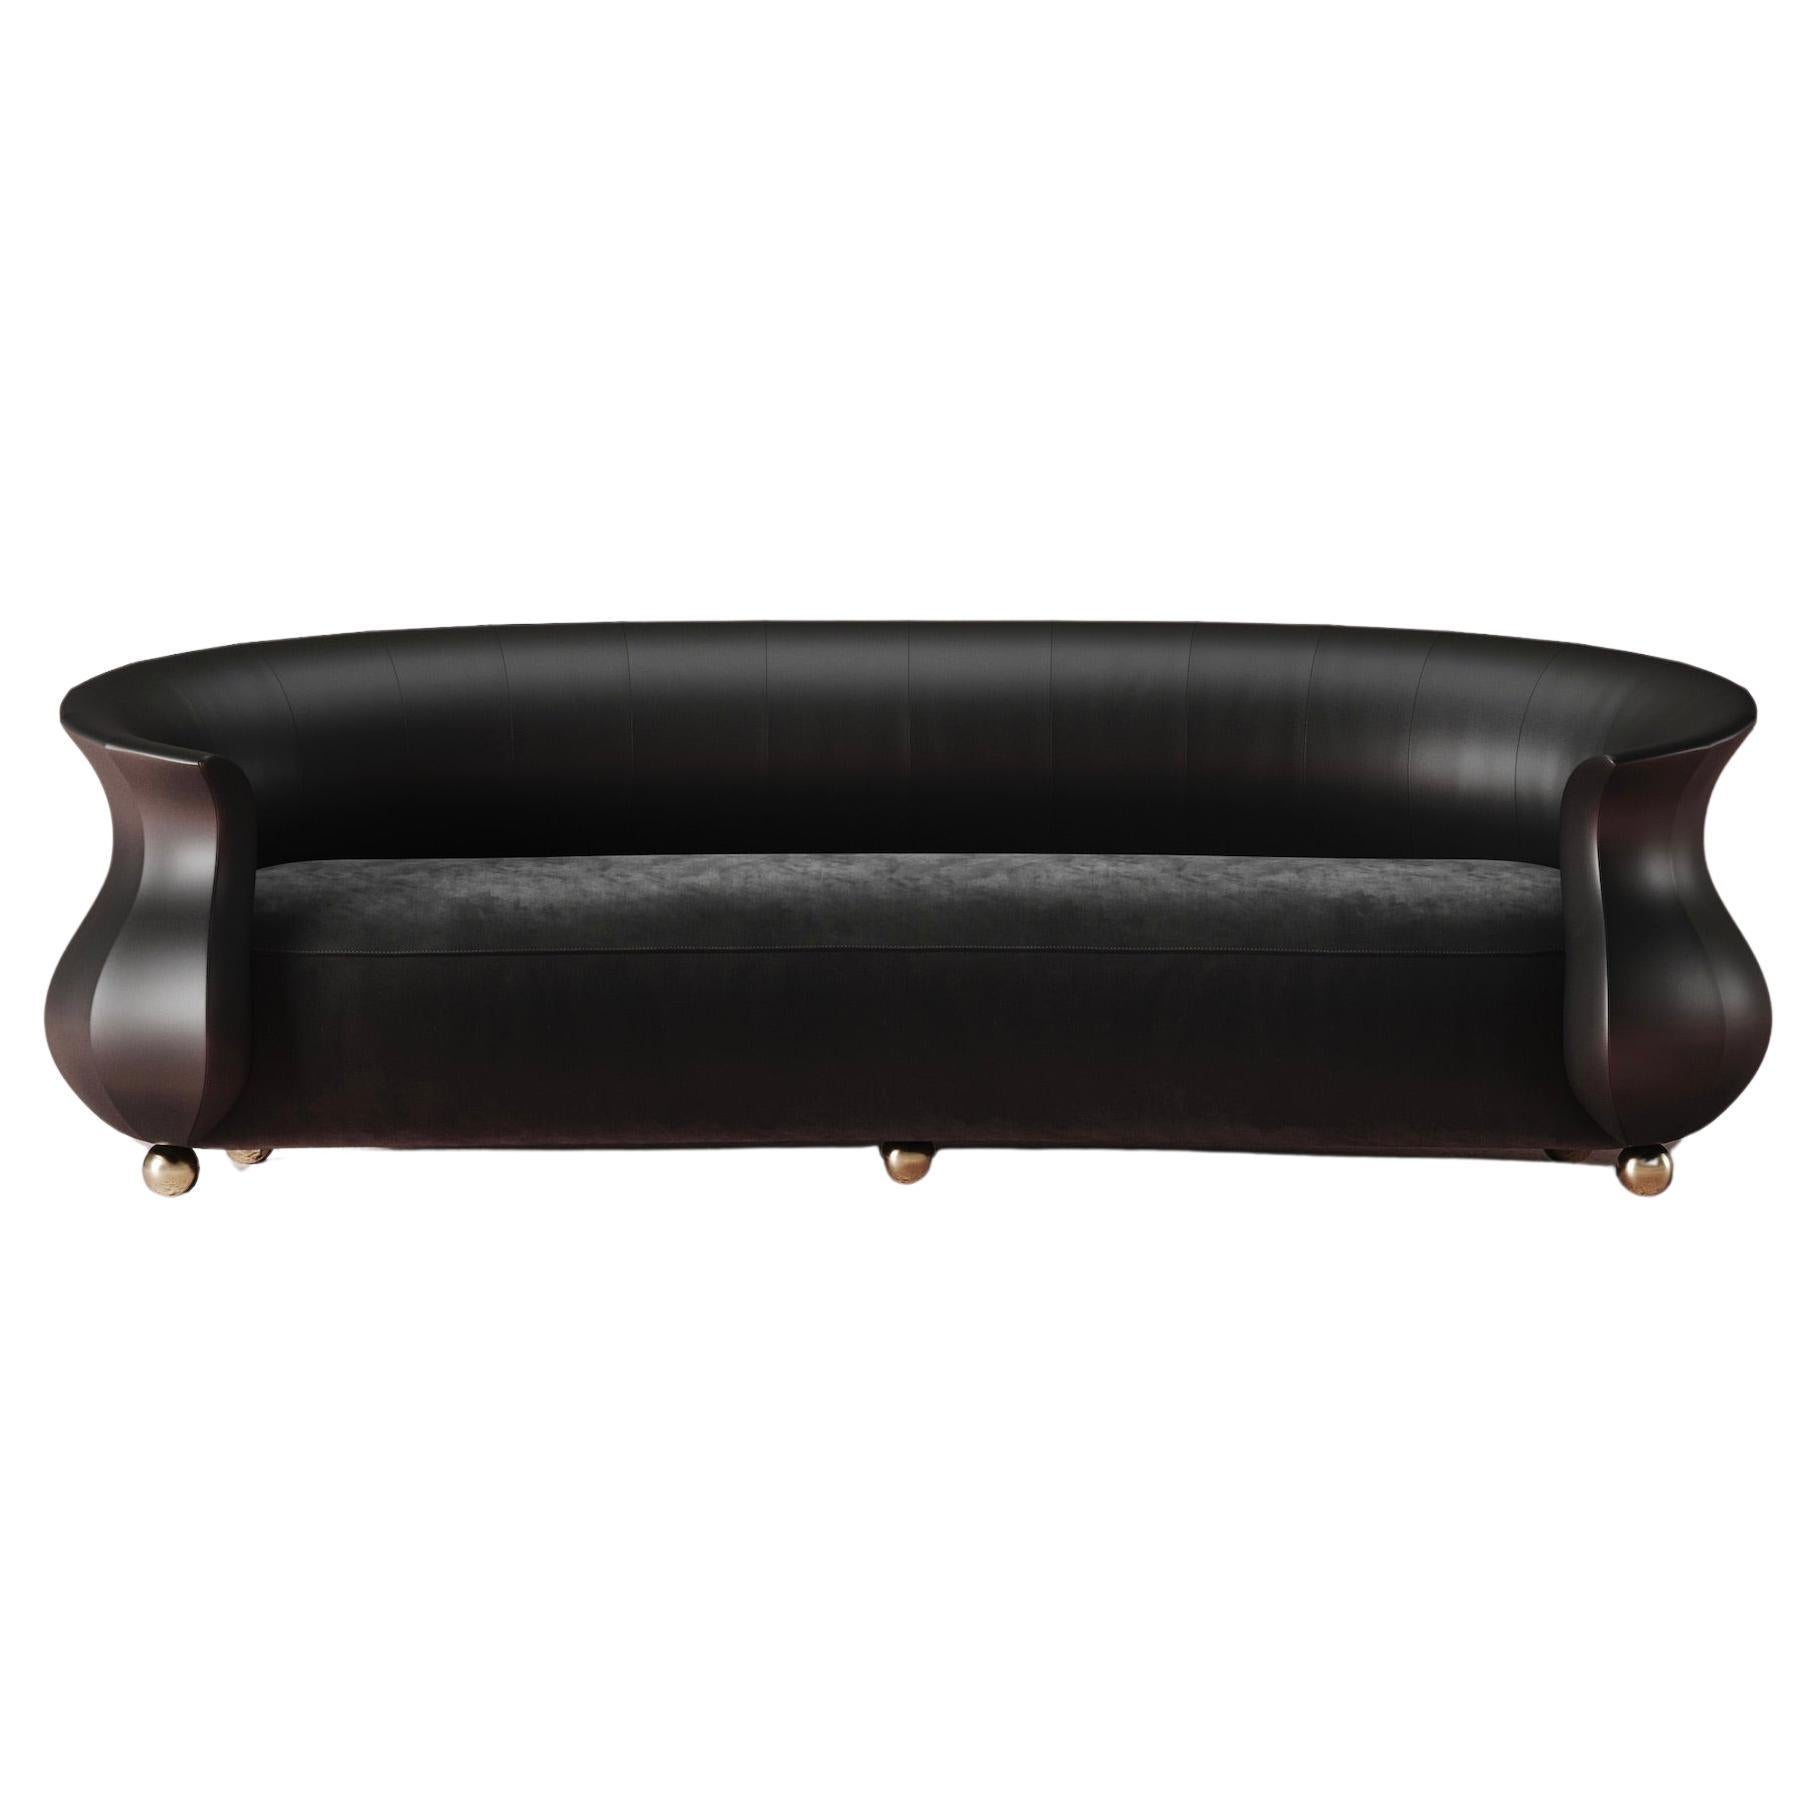 Contemporary Sculptural Organic Mid Century style Curved Amphora Sofa For Sale